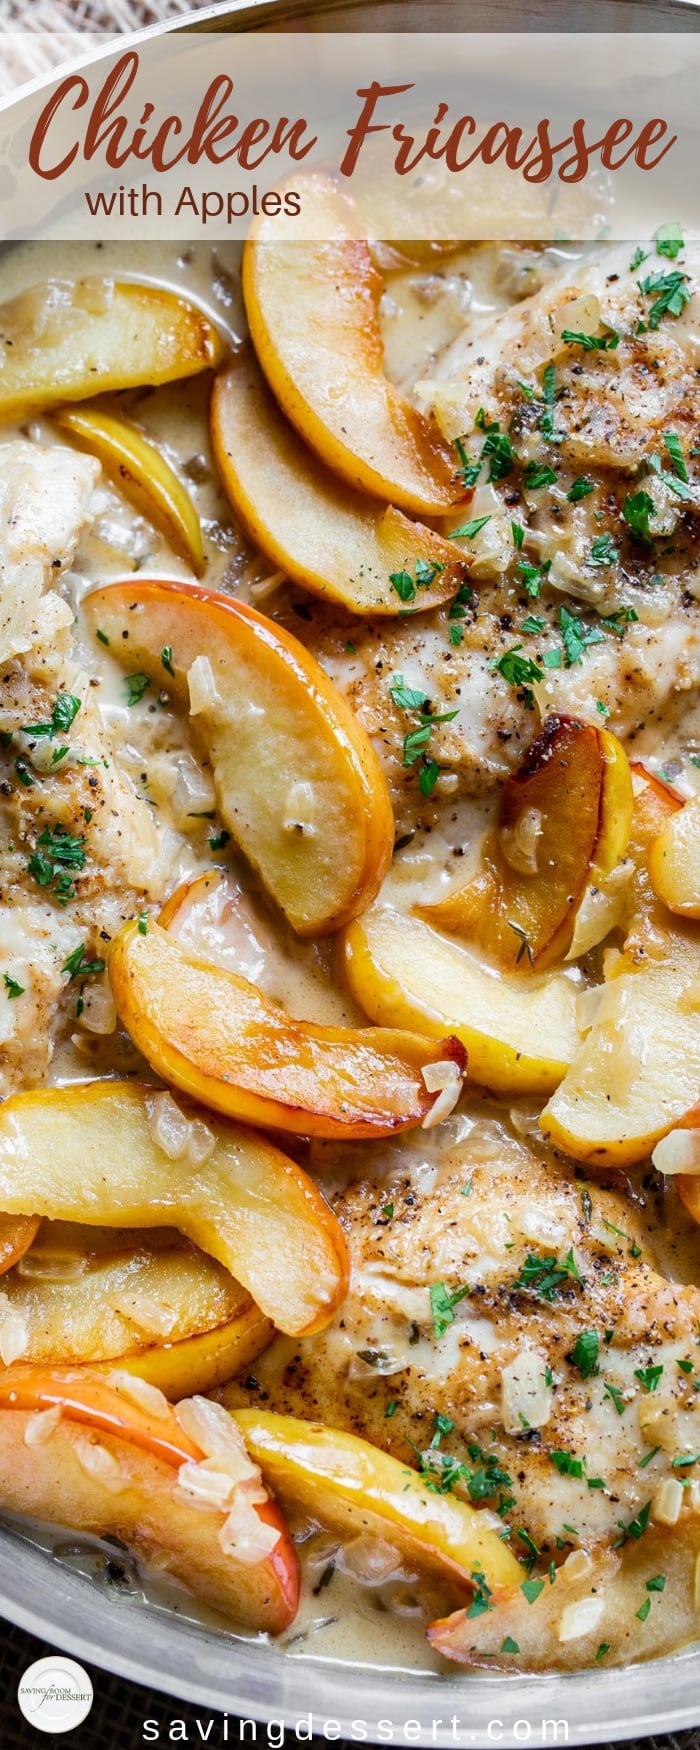 Enjoy this delicious Chicken Fricassee with Apples made with gently stewed chicken breasts in a creamy white sauce with chicken broth, apple cider and a splash of apple cider vinegar for wonderful balance. #savingroomfordessert #fricassee #chickendinner #chickenfricassee #chickenandapples #chickenapple